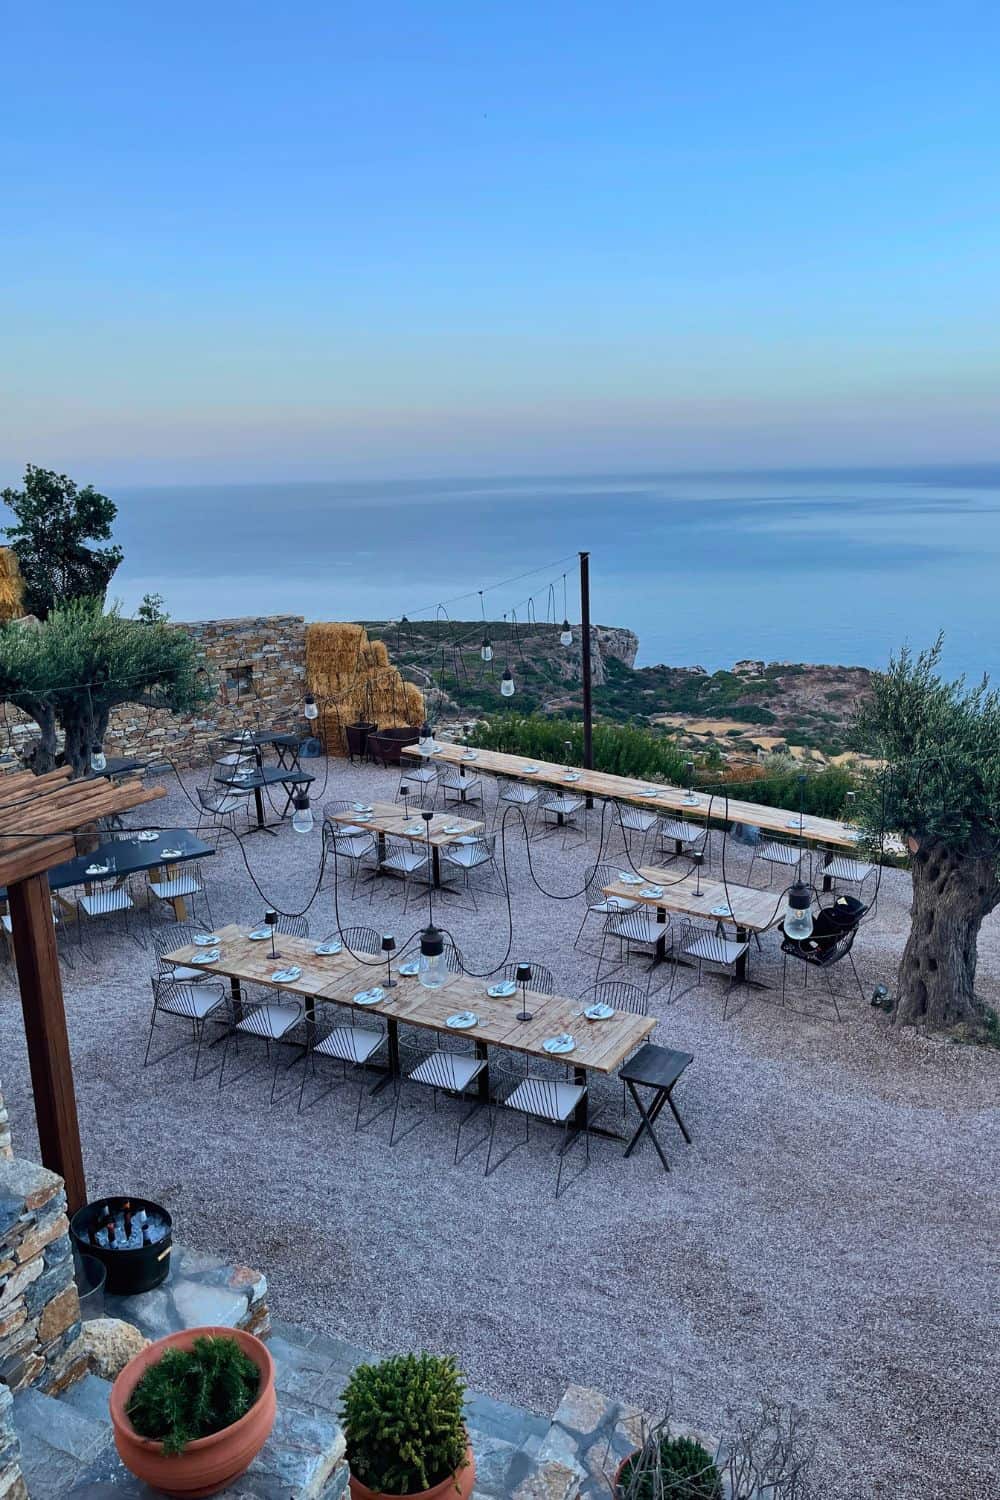 An outdoor dining terrace offers a stunning view over the serene expanse of the Aegean Sea from a high vantage point in Sifnos